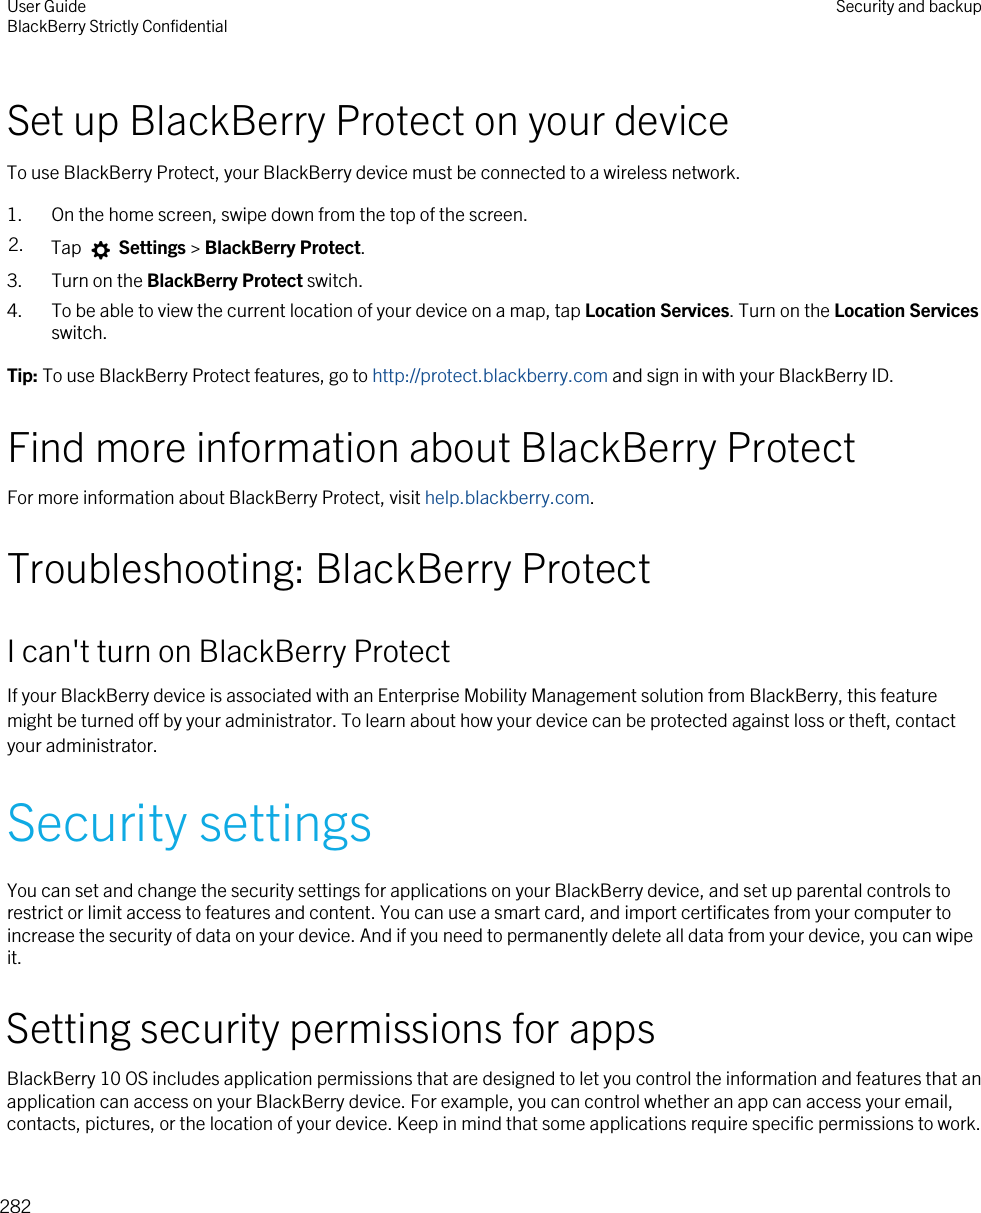 Set up BlackBerry Protect on your deviceTo use BlackBerry Protect, your BlackBerry device must be connected to a wireless network.1. On the home screen, swipe down from the top of the screen.2. Tap   Settings &gt; BlackBerry Protect.3. Turn on the BlackBerry Protect switch.4. To be able to view the current location of your device on a map, tap Location Services. Turn on the Location Services switch.Tip: To use BlackBerry Protect features, go to http://protect.blackberry.com and sign in with your BlackBerry ID.Find more information about BlackBerry ProtectFor more information about BlackBerry Protect, visit help.blackberry.com.Troubleshooting: BlackBerry ProtectI can&apos;t turn on BlackBerry ProtectIf your BlackBerry device is associated with an Enterprise Mobility Management solution from BlackBerry, this feature might be turned off by your administrator. To learn about how your device can be protected against loss or theft, contact your administrator.Security settingsYou can set and change the security settings for applications on your BlackBerry device, and set up parental controls to restrict or limit access to features and content. You can use a smart card, and import certificates from your computer to increase the security of data on your device. And if you need to permanently delete all data from your device, you can wipe it.Setting security permissions for appsBlackBerry 10 OS includes application permissions that are designed to let you control the information and features that an application can access on your BlackBerry device. For example, you can control whether an app can access your email, contacts, pictures, or the location of your device. Keep in mind that some applications require specific permissions to work. User GuideBlackBerry Strictly Confidential Security and backup282